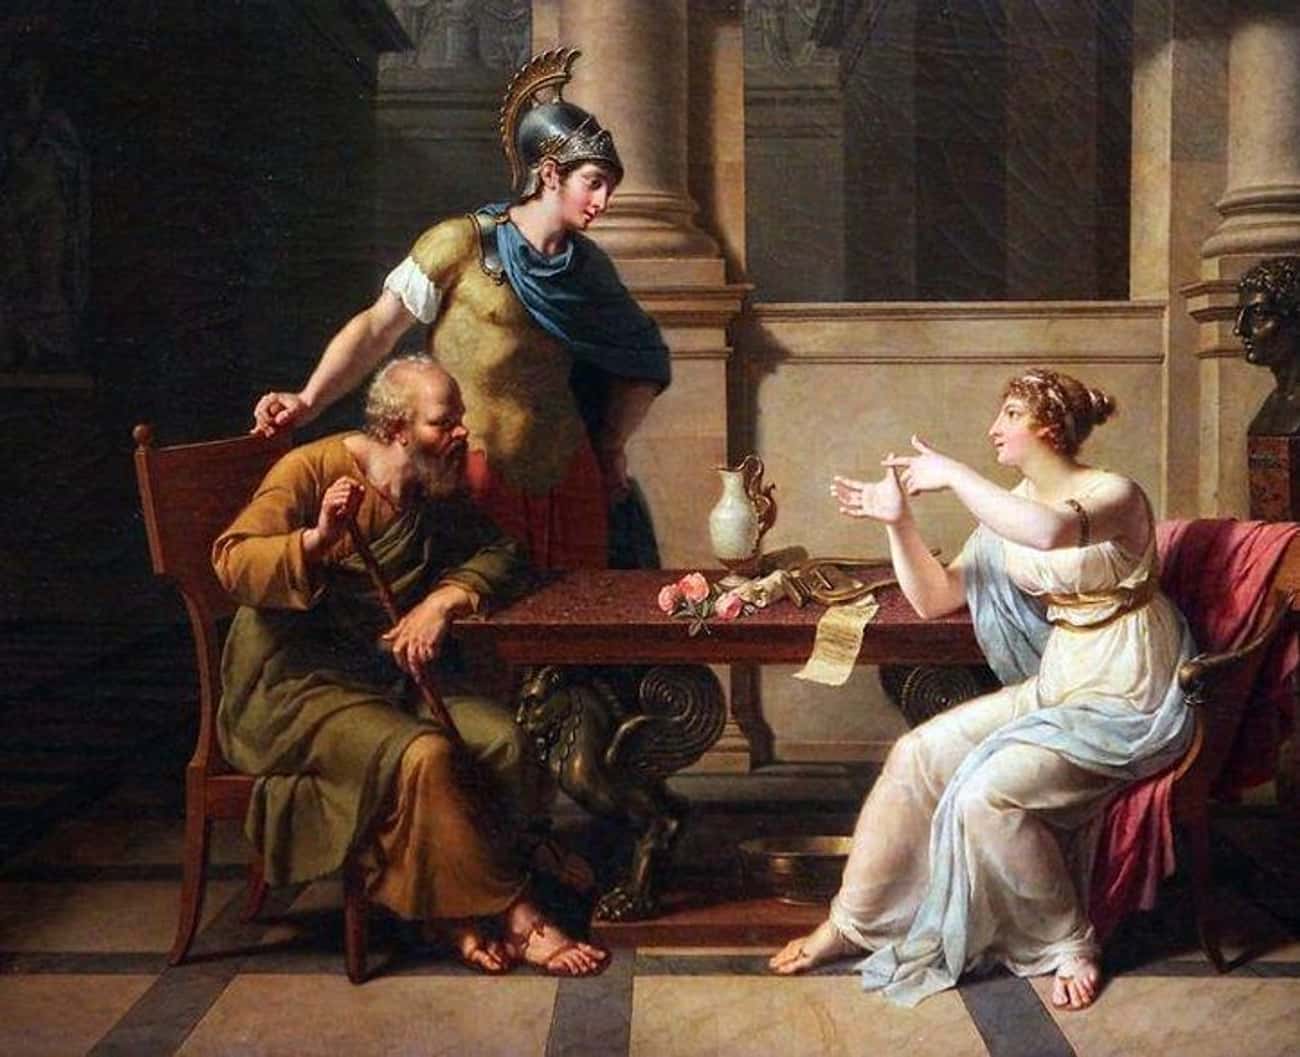 A Courtesan Named Aspasia Inspired Socrates And Pericles